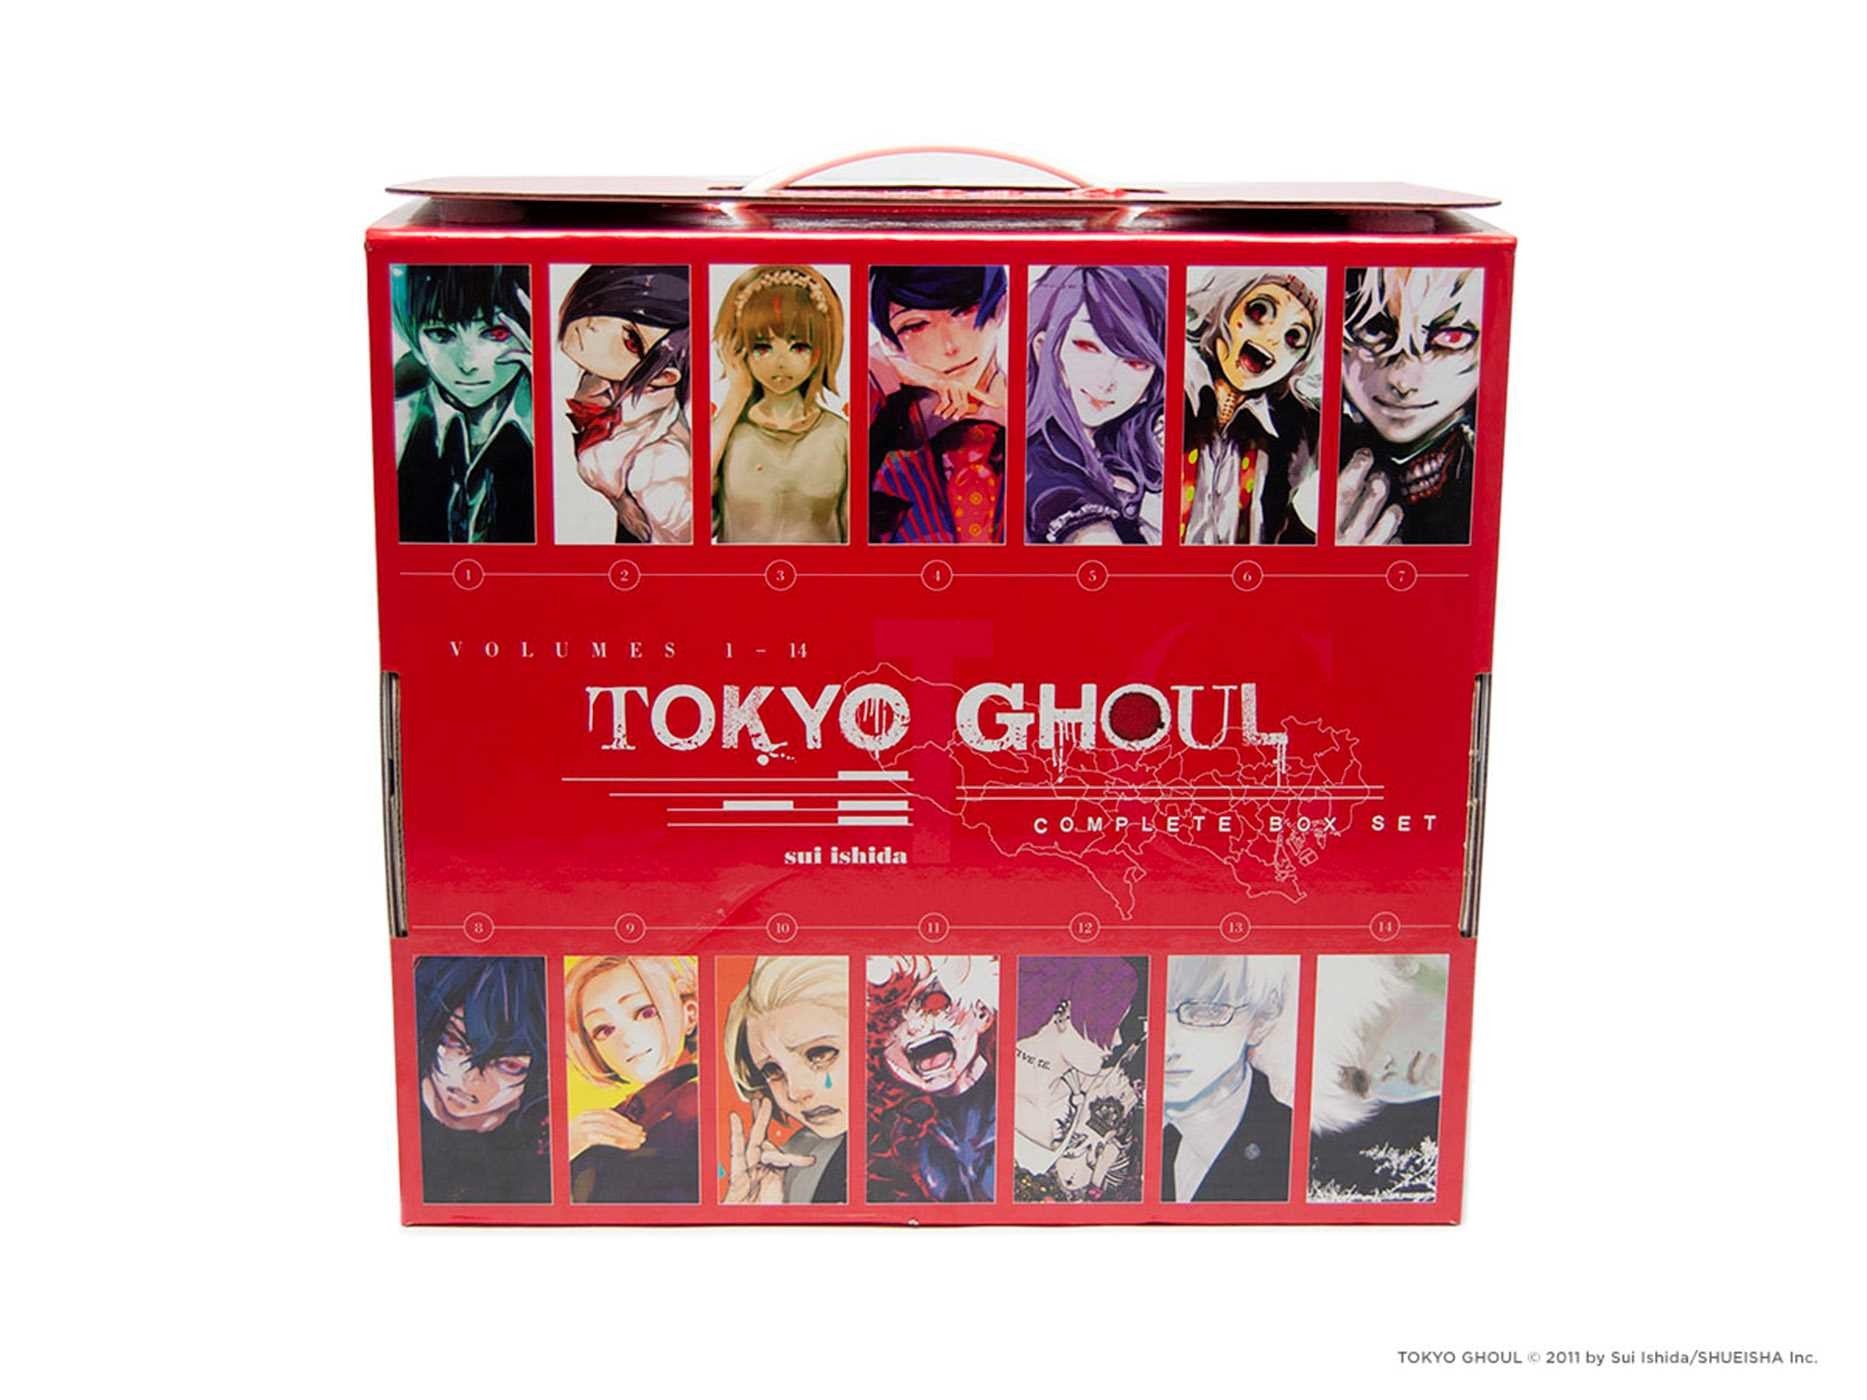 Stream PDF read online Tokyo Ghoul Complete Box Set: Includes vols. 1-14  with premium free acces from rhettjomatodd